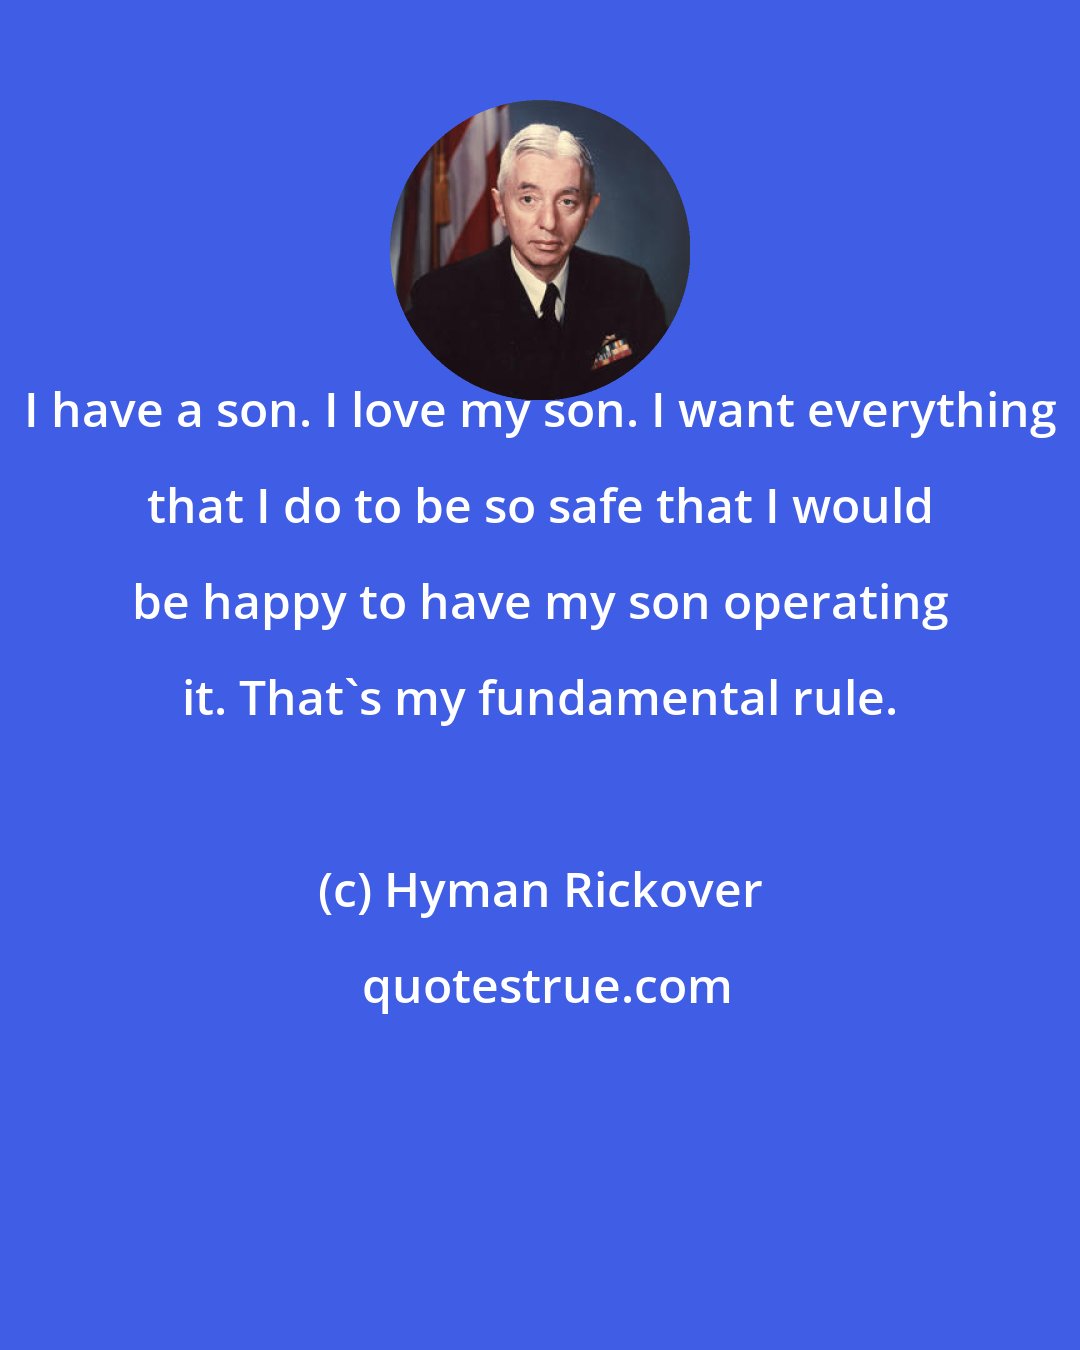 Hyman Rickover: I have a son. I love my son. I want everything that I do to be so safe that I would be happy to have my son operating it. That's my fundamental rule.